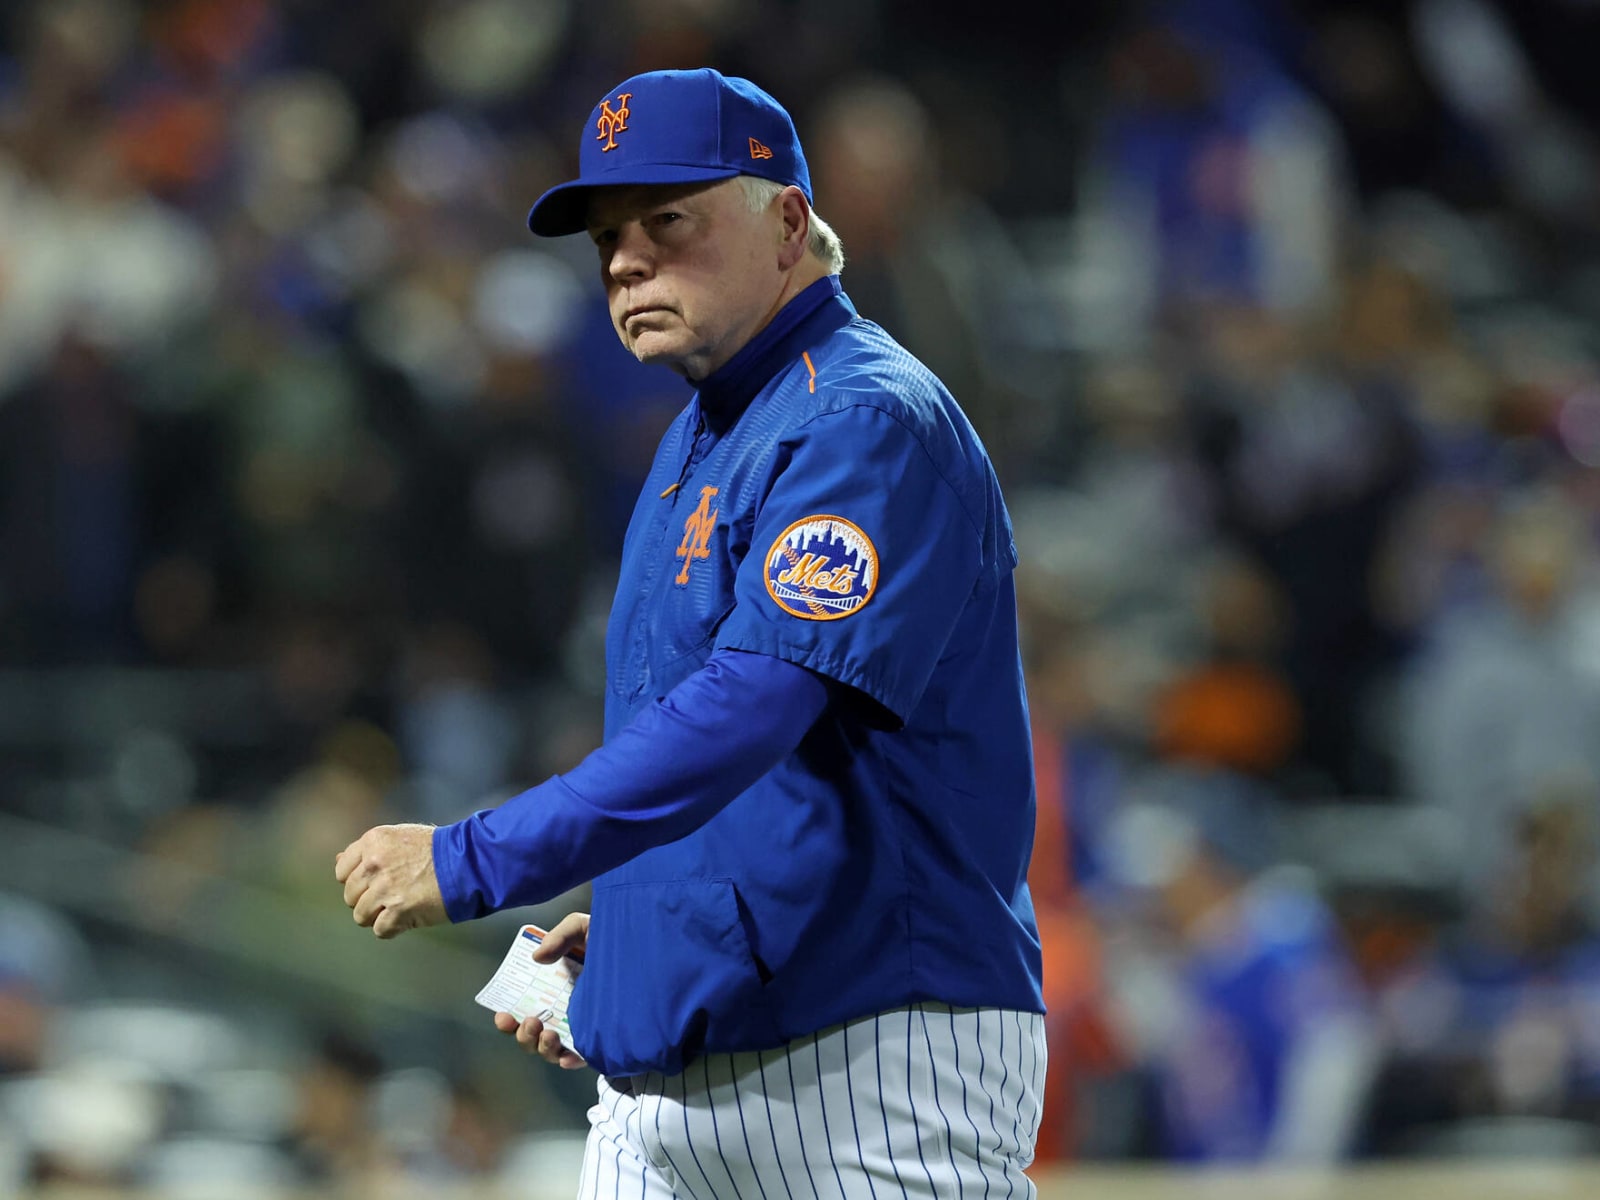 Buck Showalter says 'it's a big day' as Mets prepare to host Old